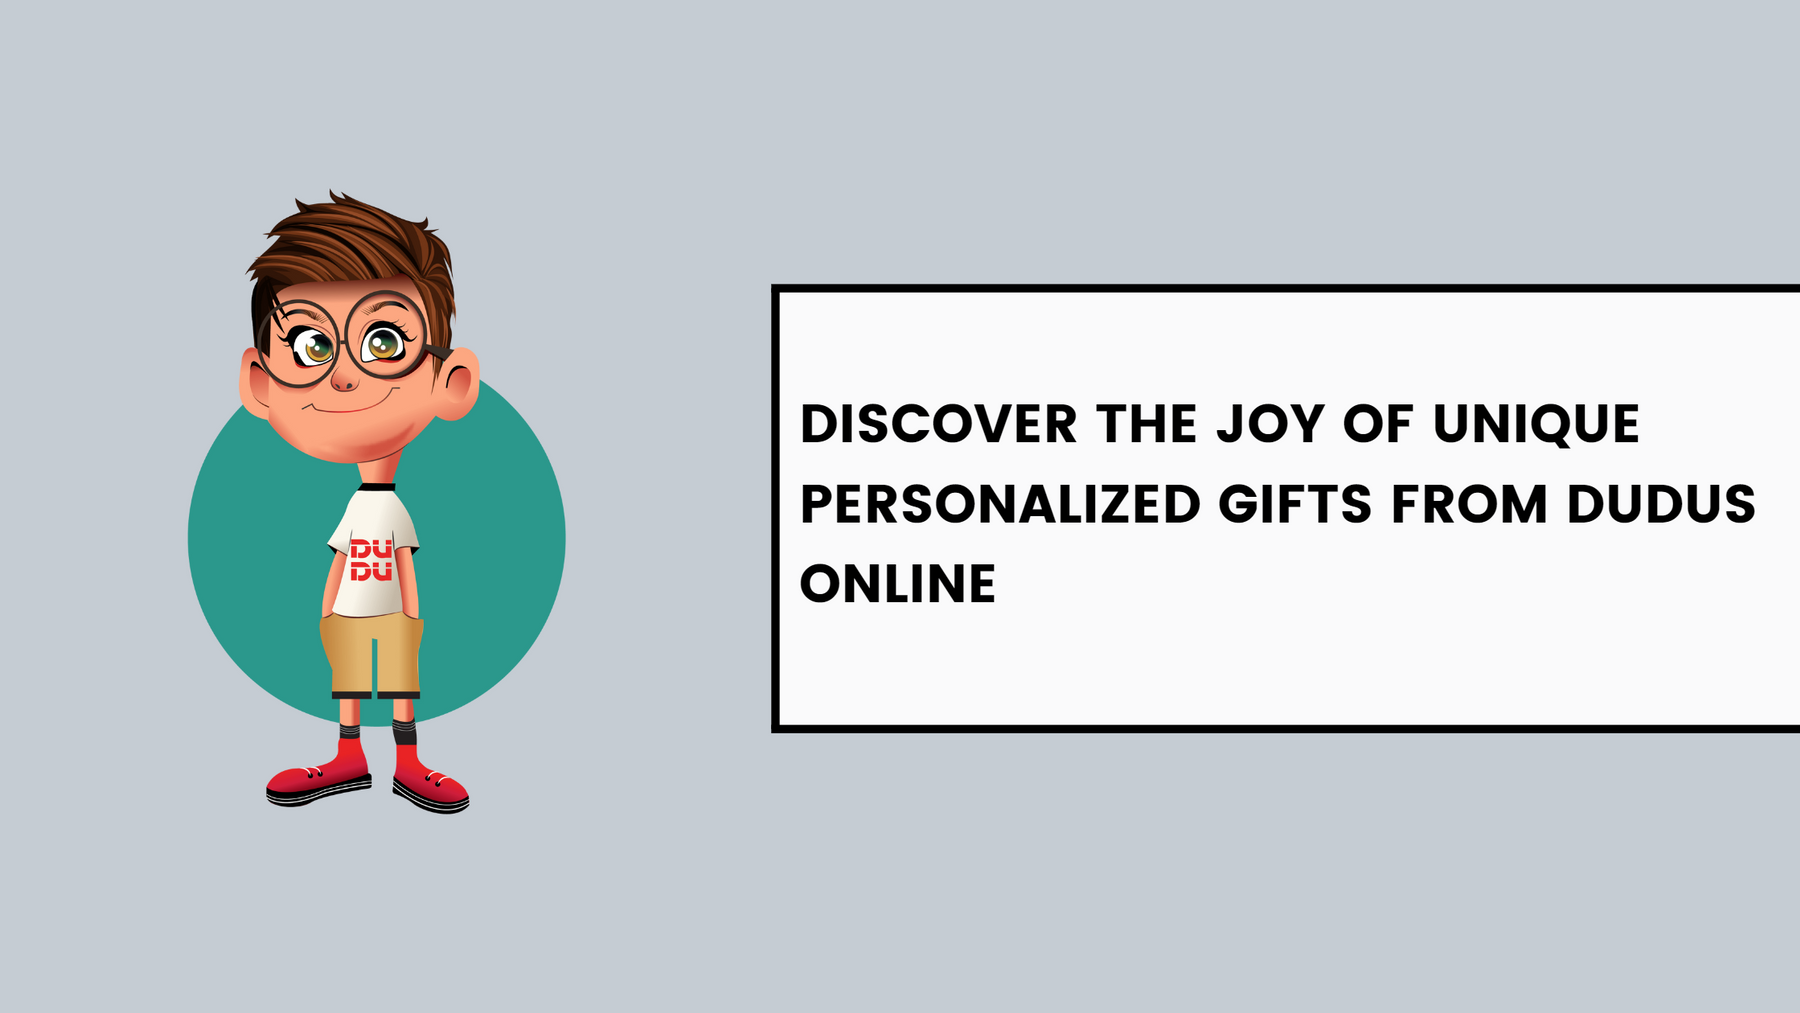 Discover the Joy of Unique Personalized Gifts from Dudus Online